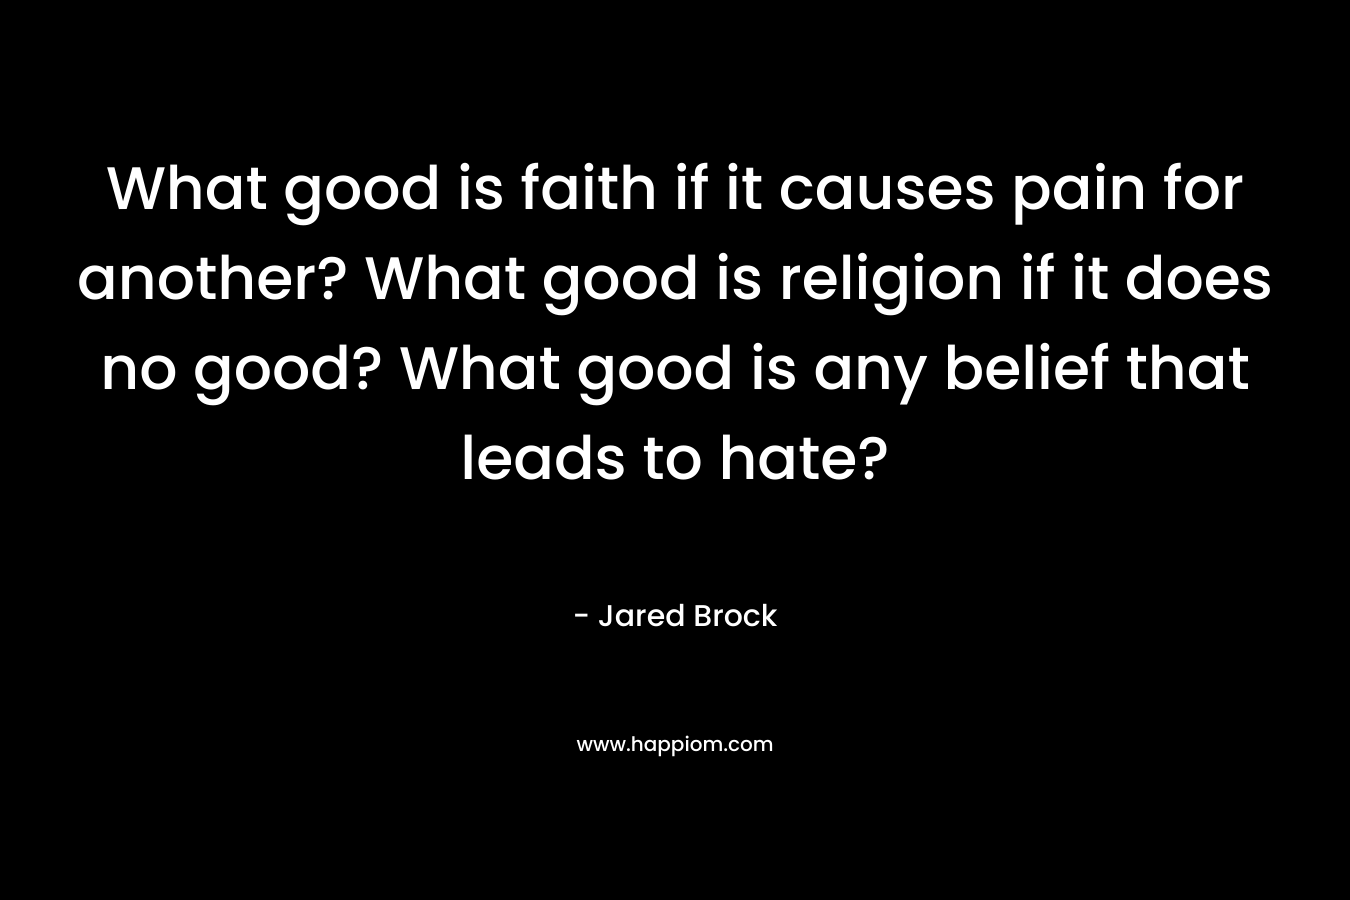 What good is faith if it causes pain for another? What good is religion if it does no good? What good is any belief that leads to hate?